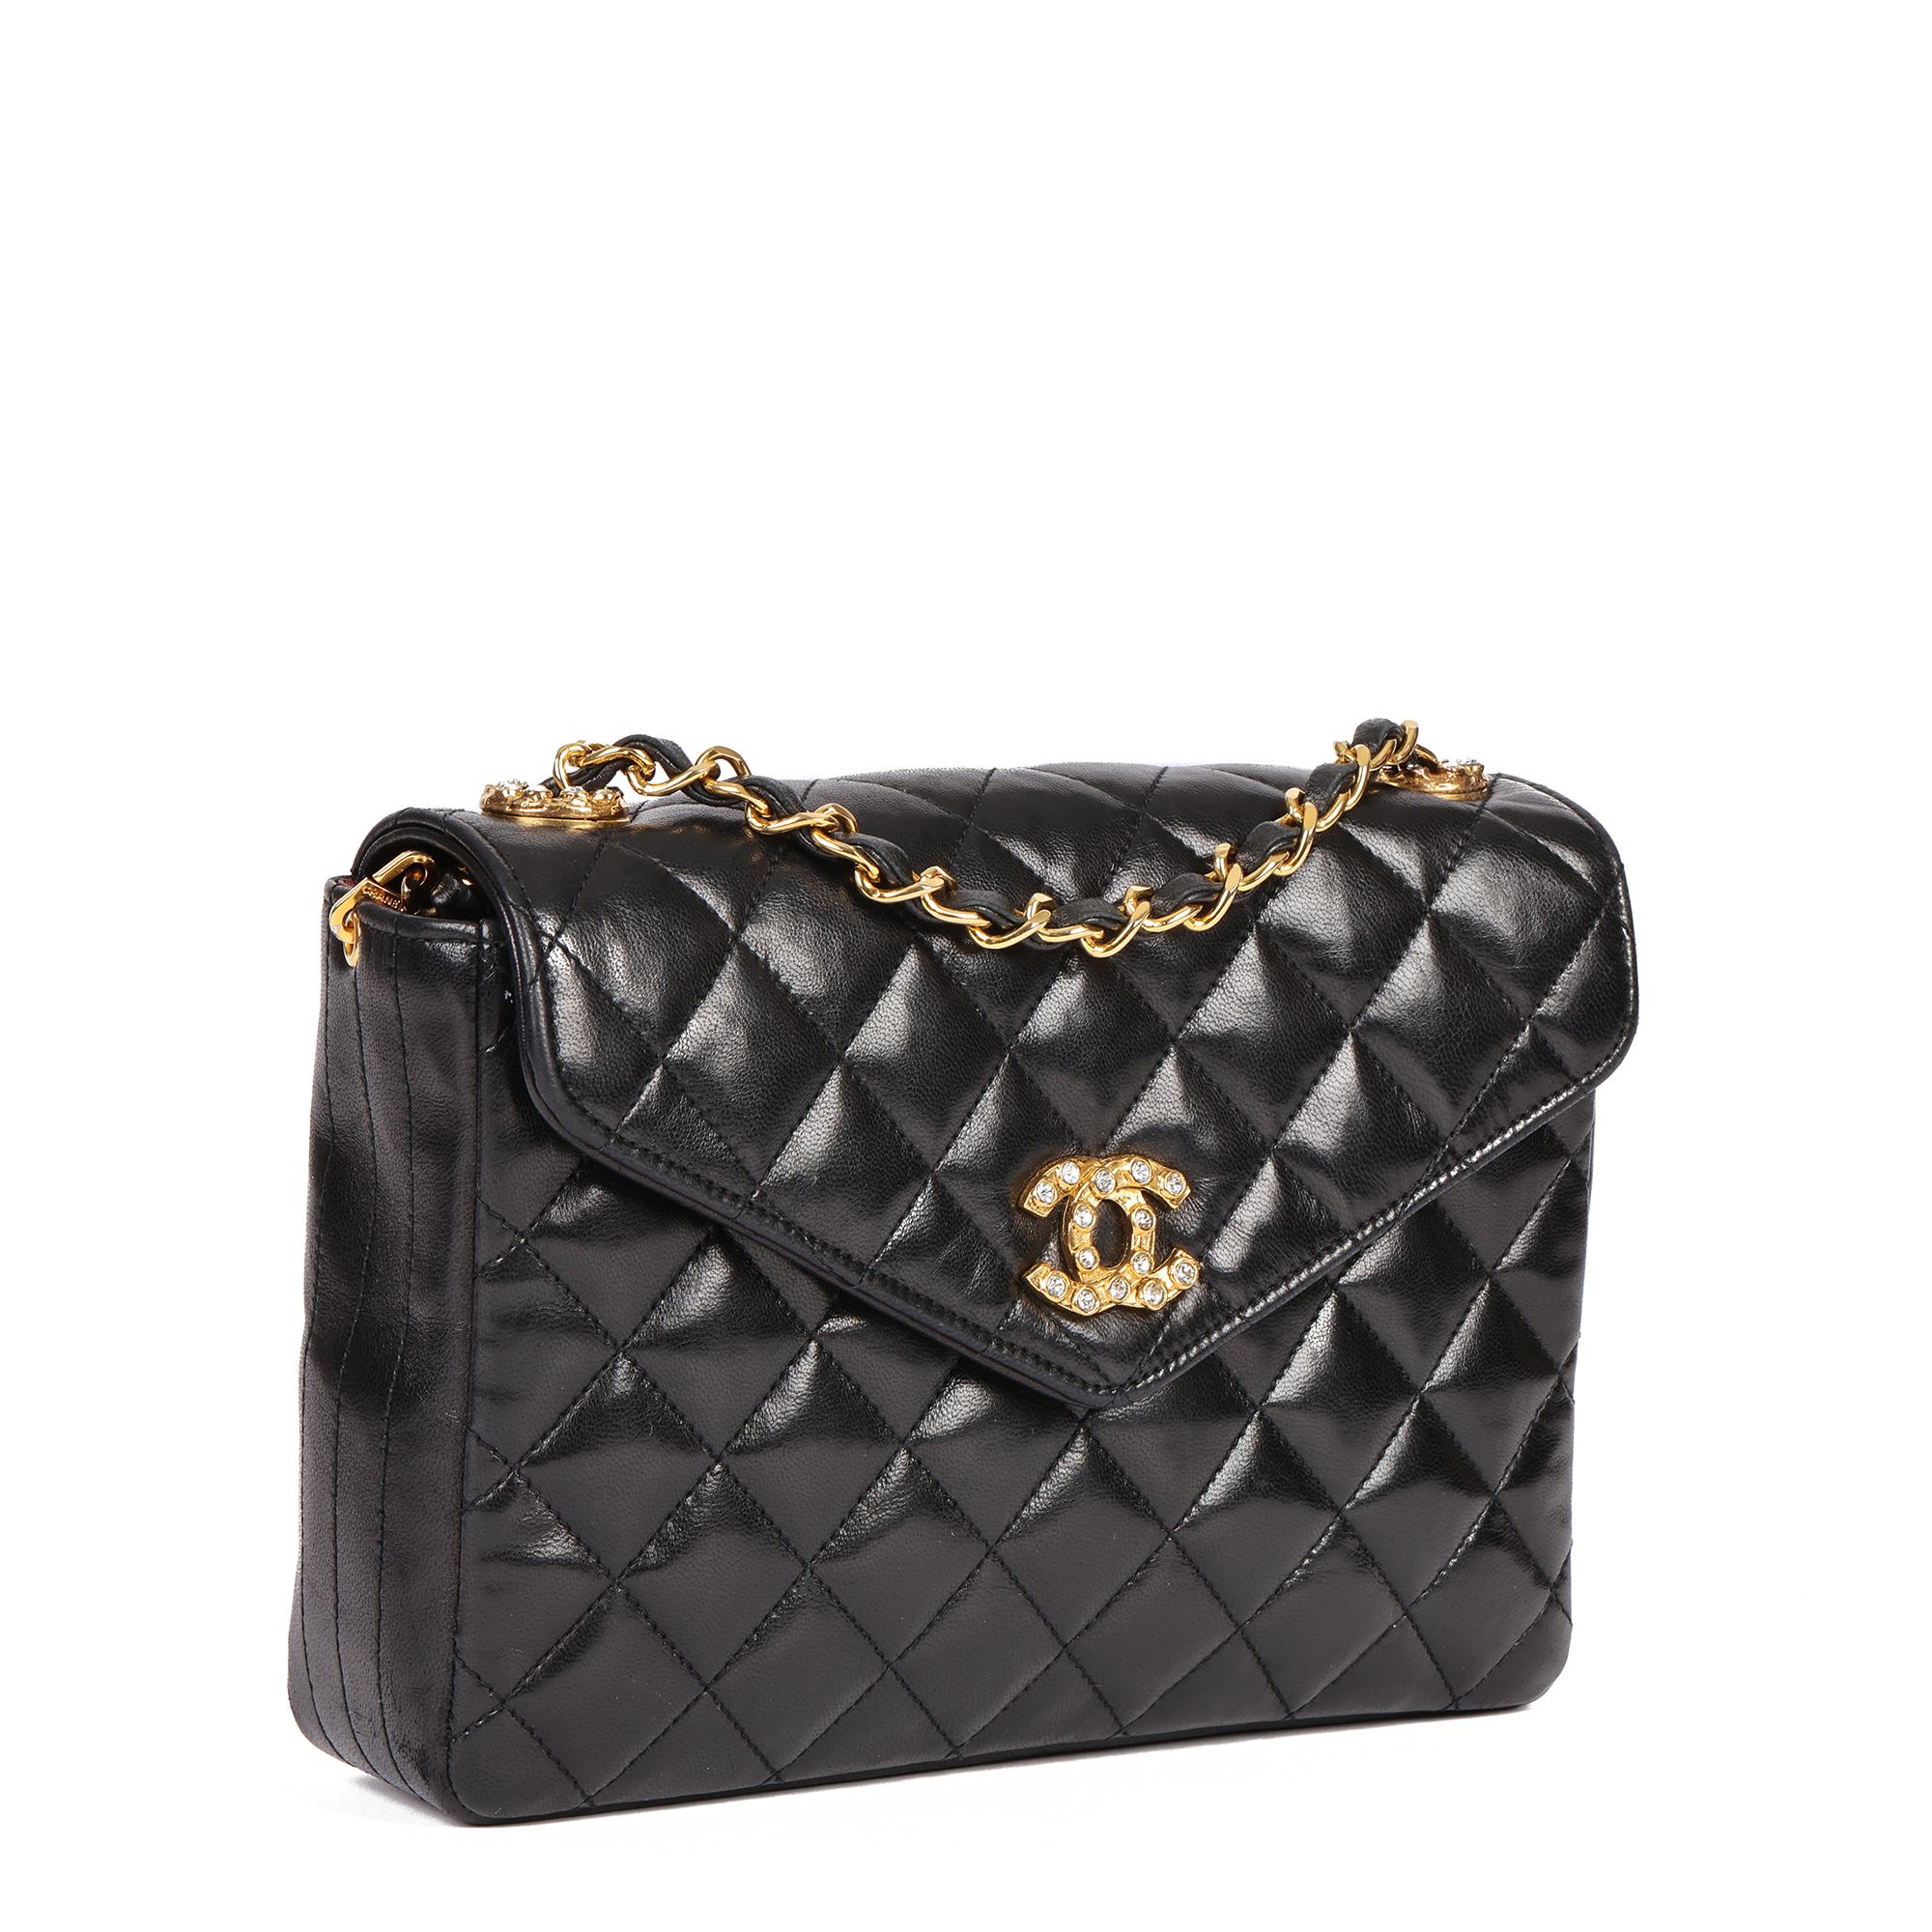 CHANEL
Black Quilted Lambskin Vintage Crystal Embellished Mini Flap Bag

Serial Number: 0538367
Age (Circa): 1988
Accompanied By: Chanel Dust Bag, Authenticity Card
Authenticity Details: Authenticity Card, Serial Sticker (Made in France)
Gender: